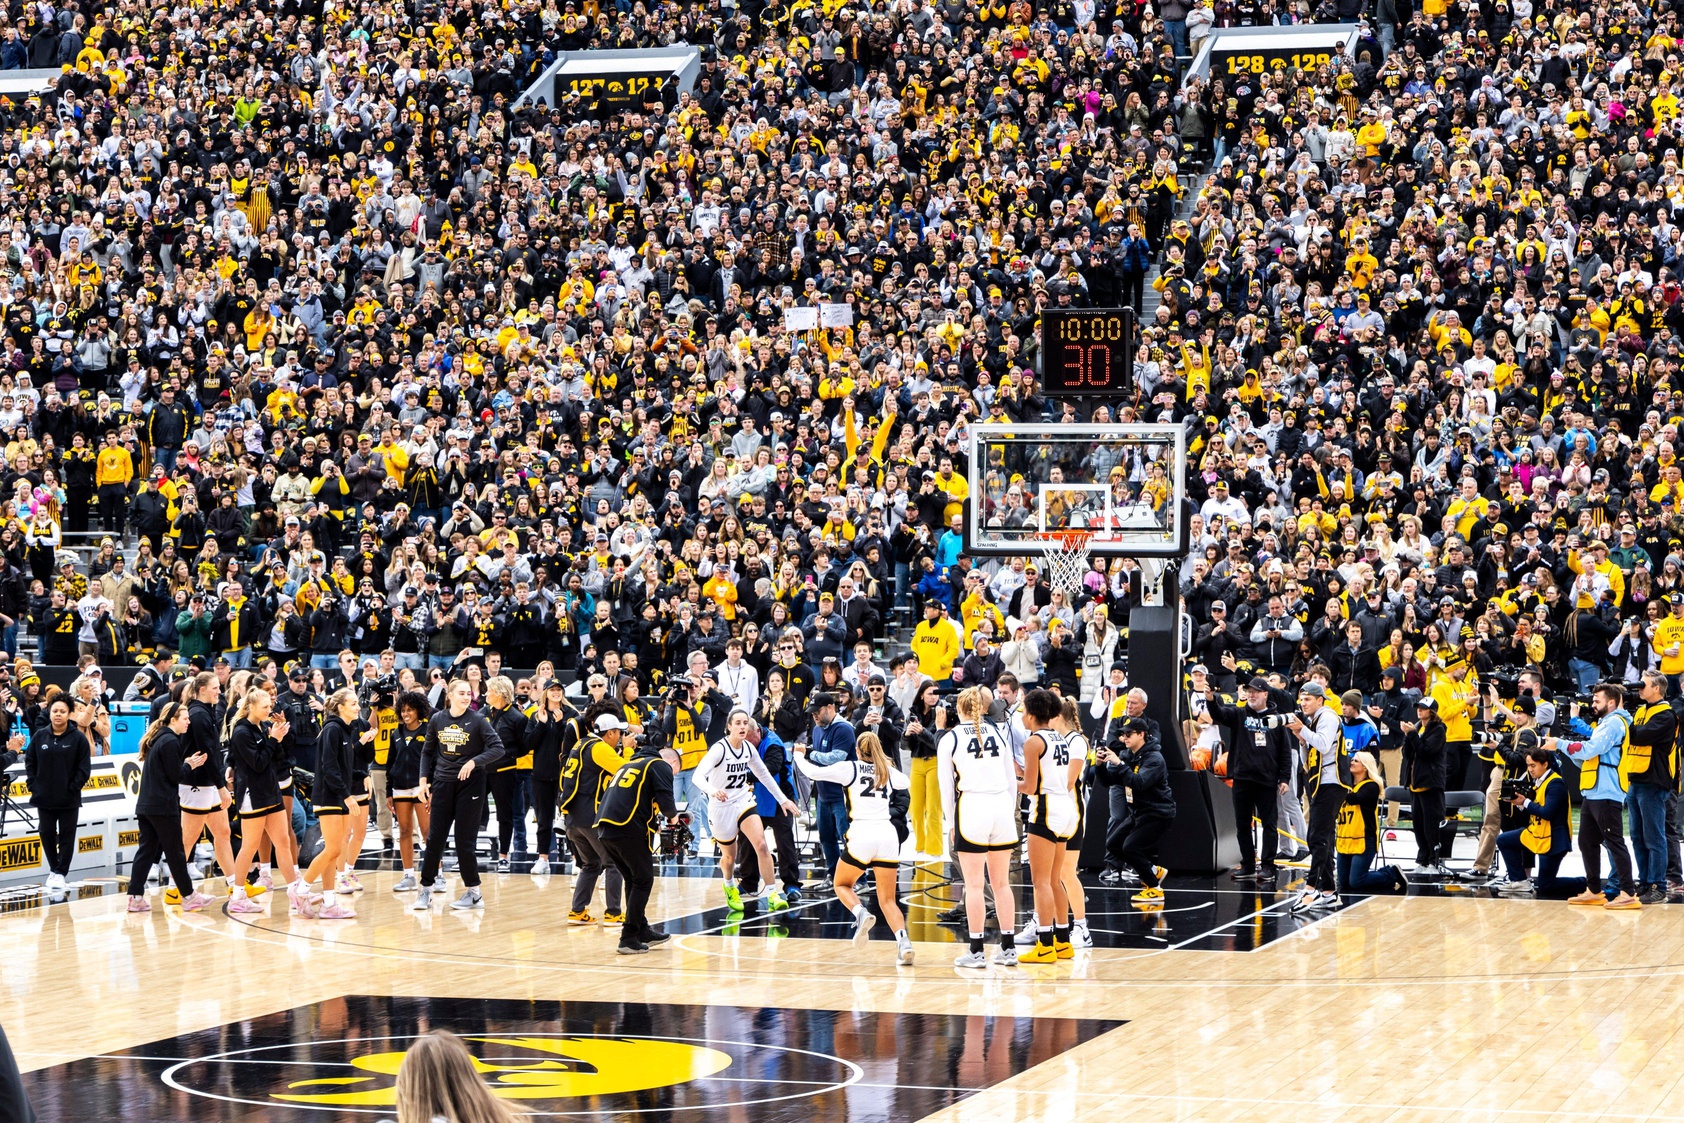 Iowa guard Caitlin Clark (22) is introduced during the Crossover at Kinnick women's basketball scrimmage between Iowa and DePaul, Sunday, Oct. 15, 2023, at Kinnick Stadium in Iowa City, Iowa.